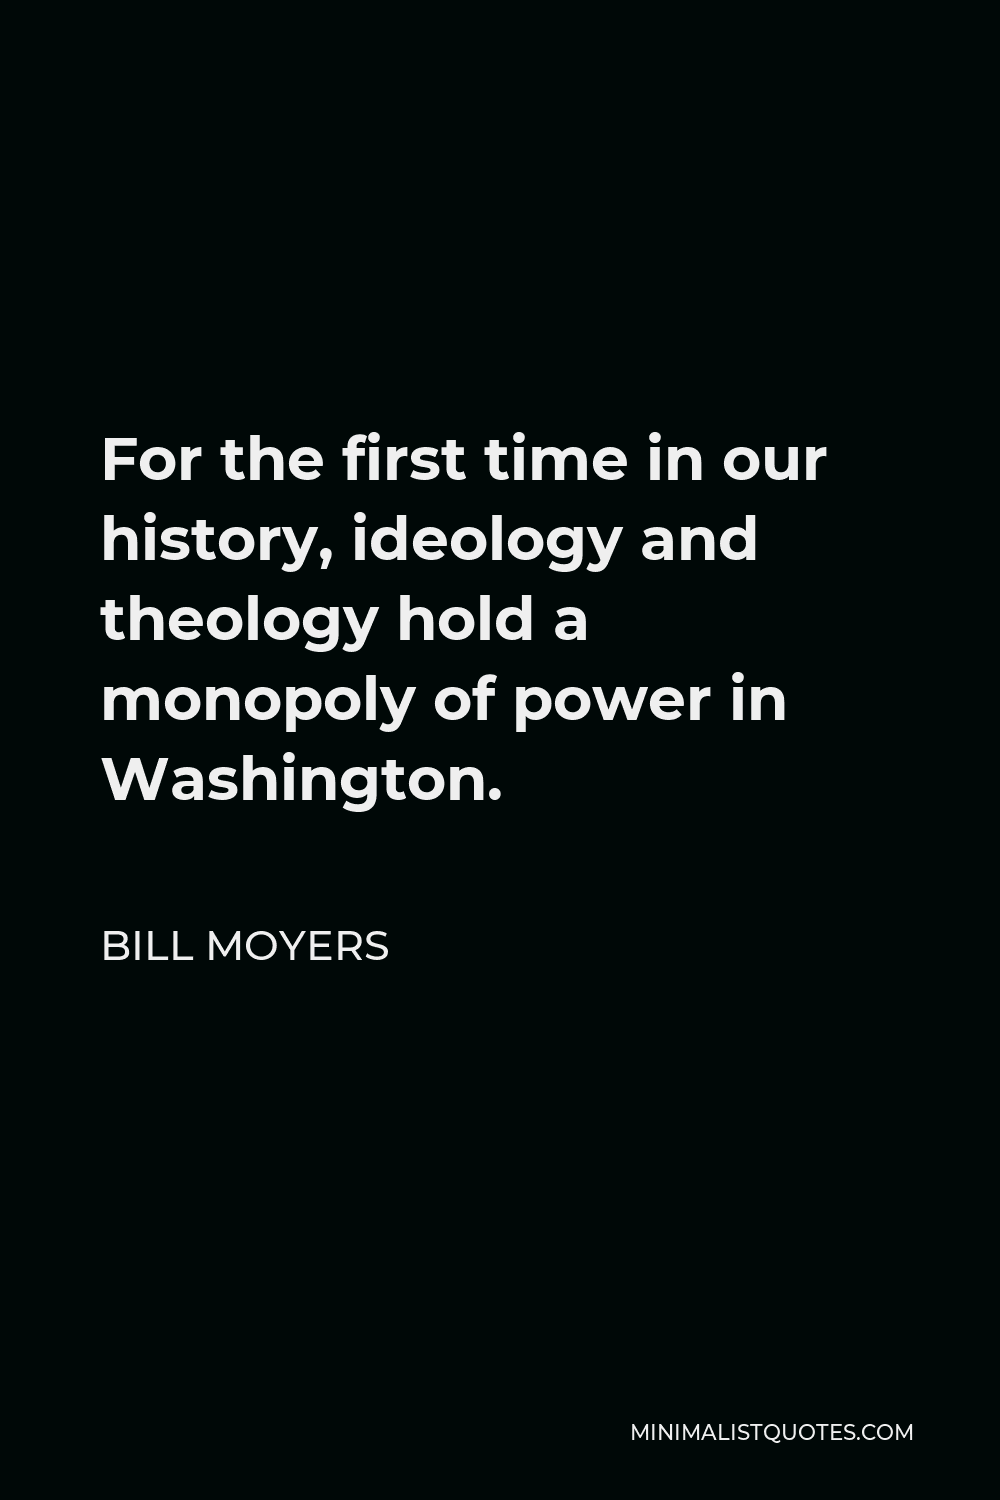 Bill Moyers Quote - For the first time in our history, ideology and theology hold a monopoly of power in Washington.